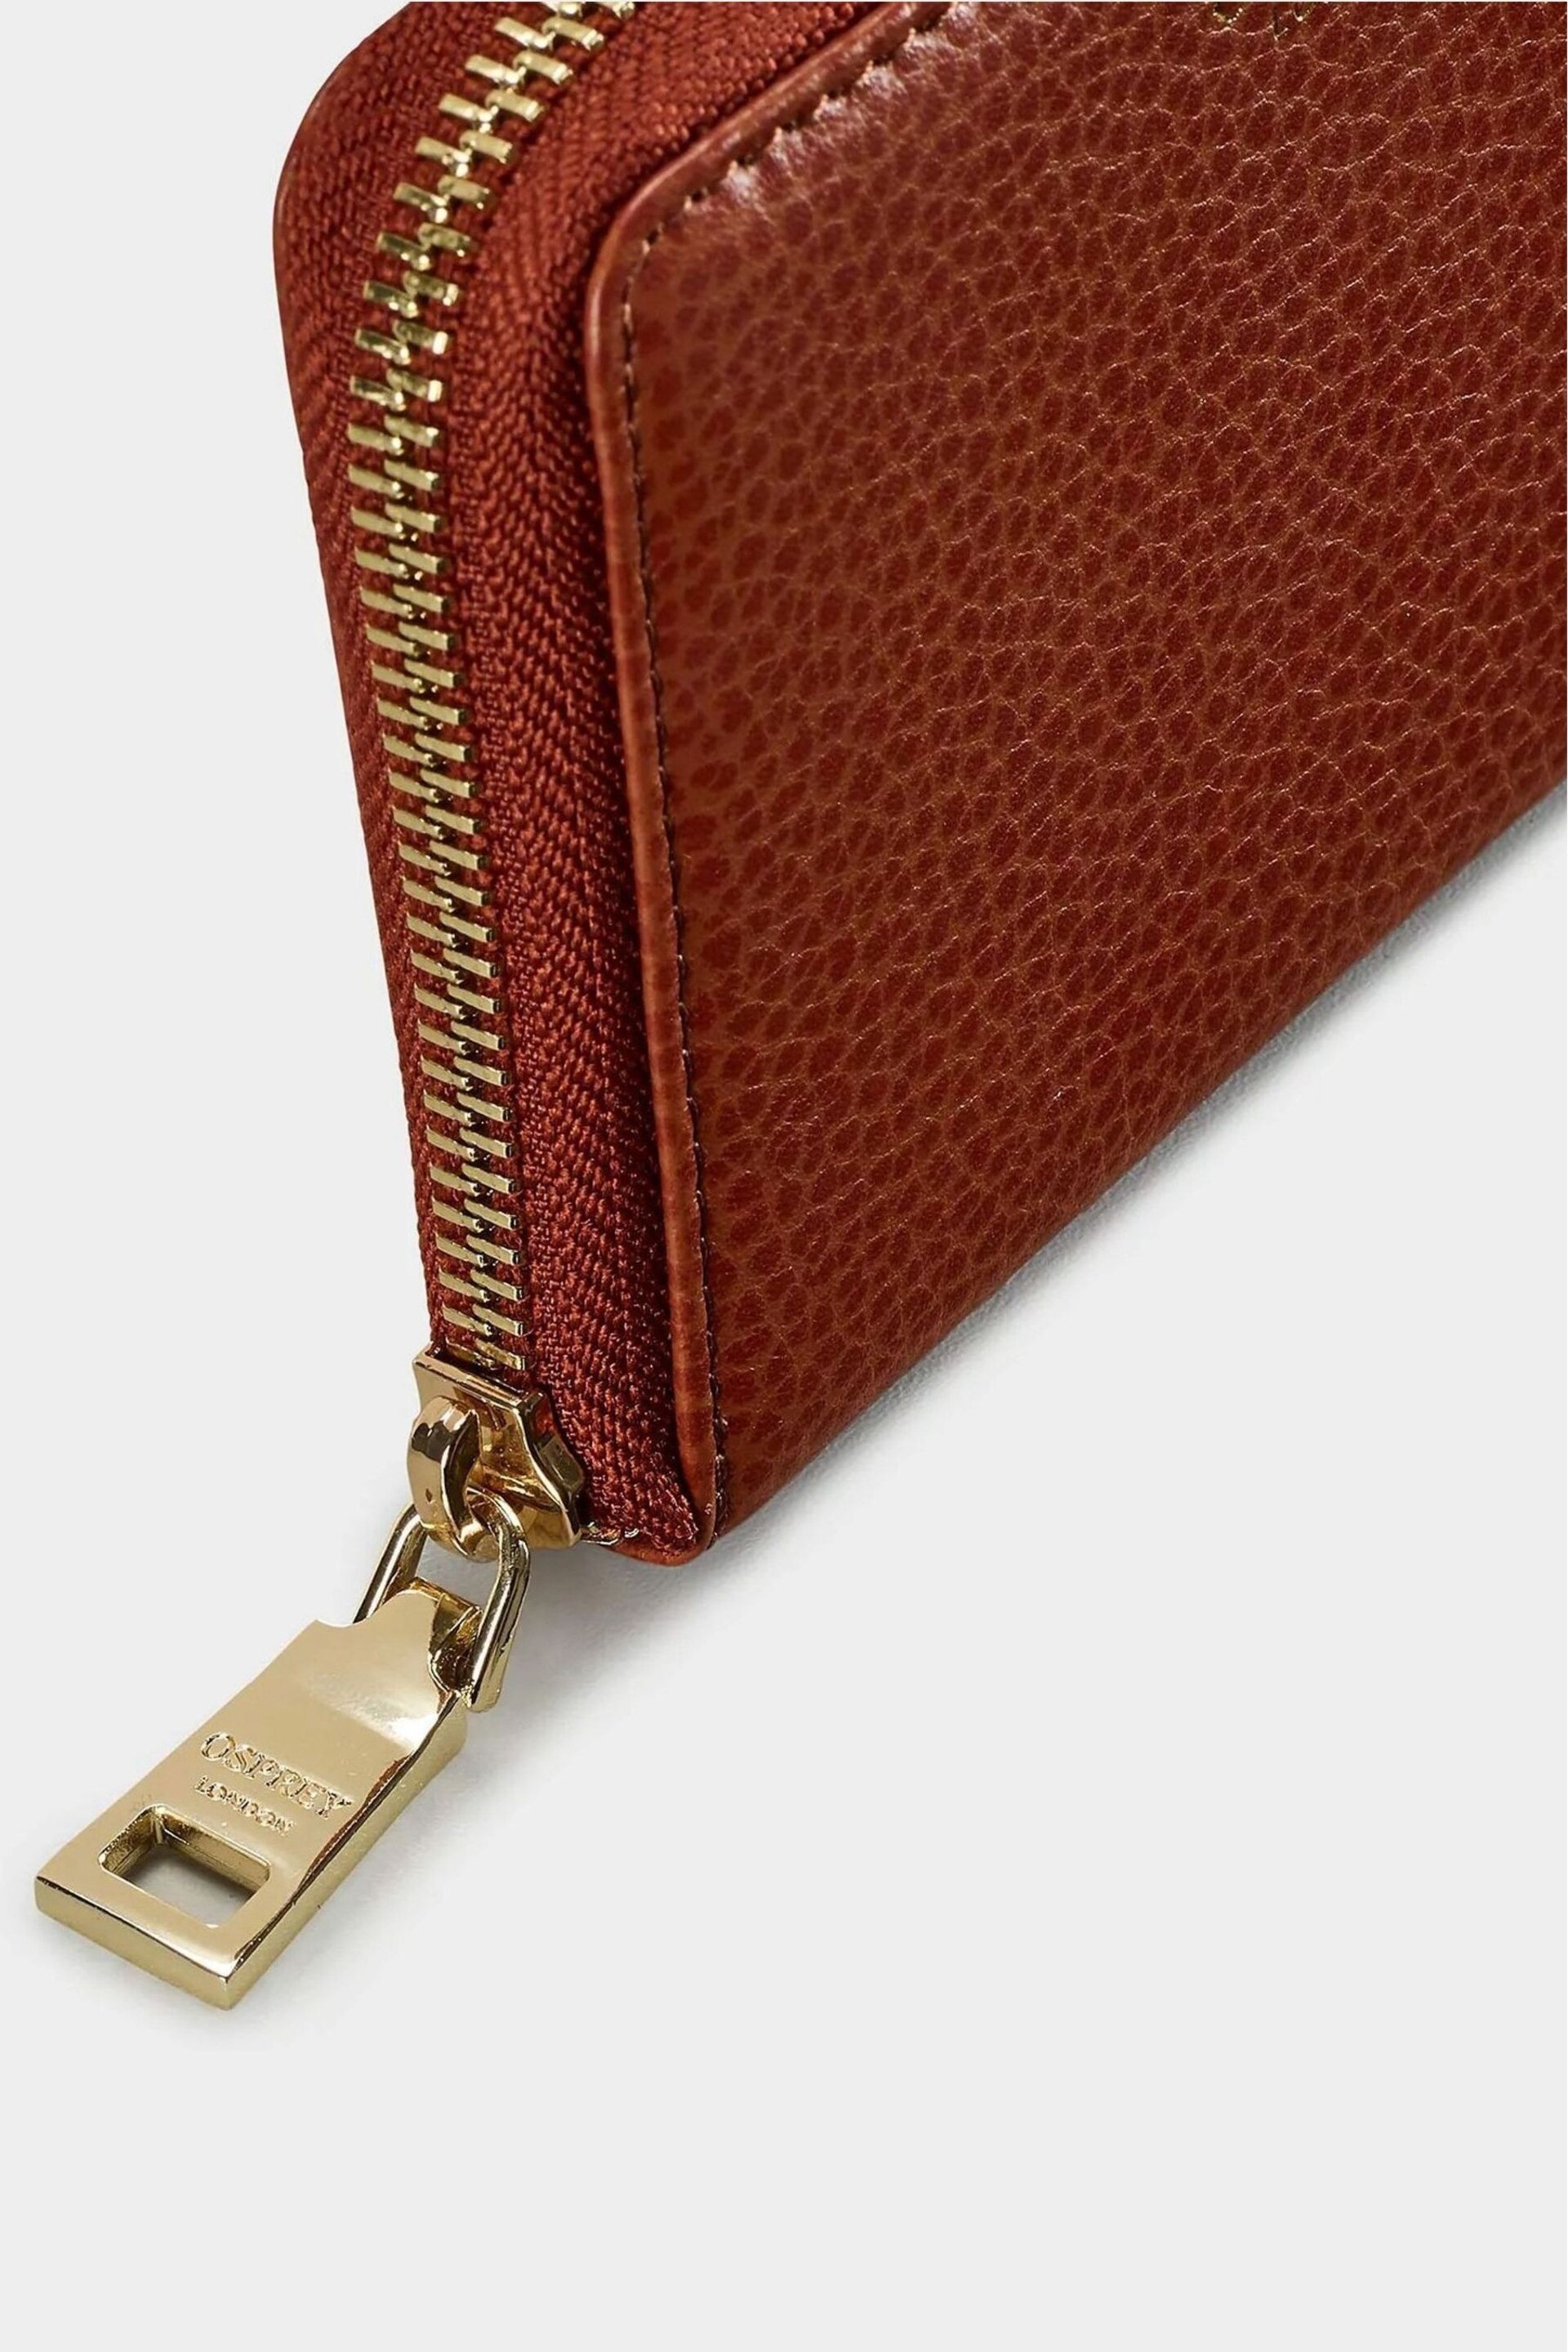 OSPREY LONDON Red The Collier Leather Zip-Round Purse - Image 2 of 3